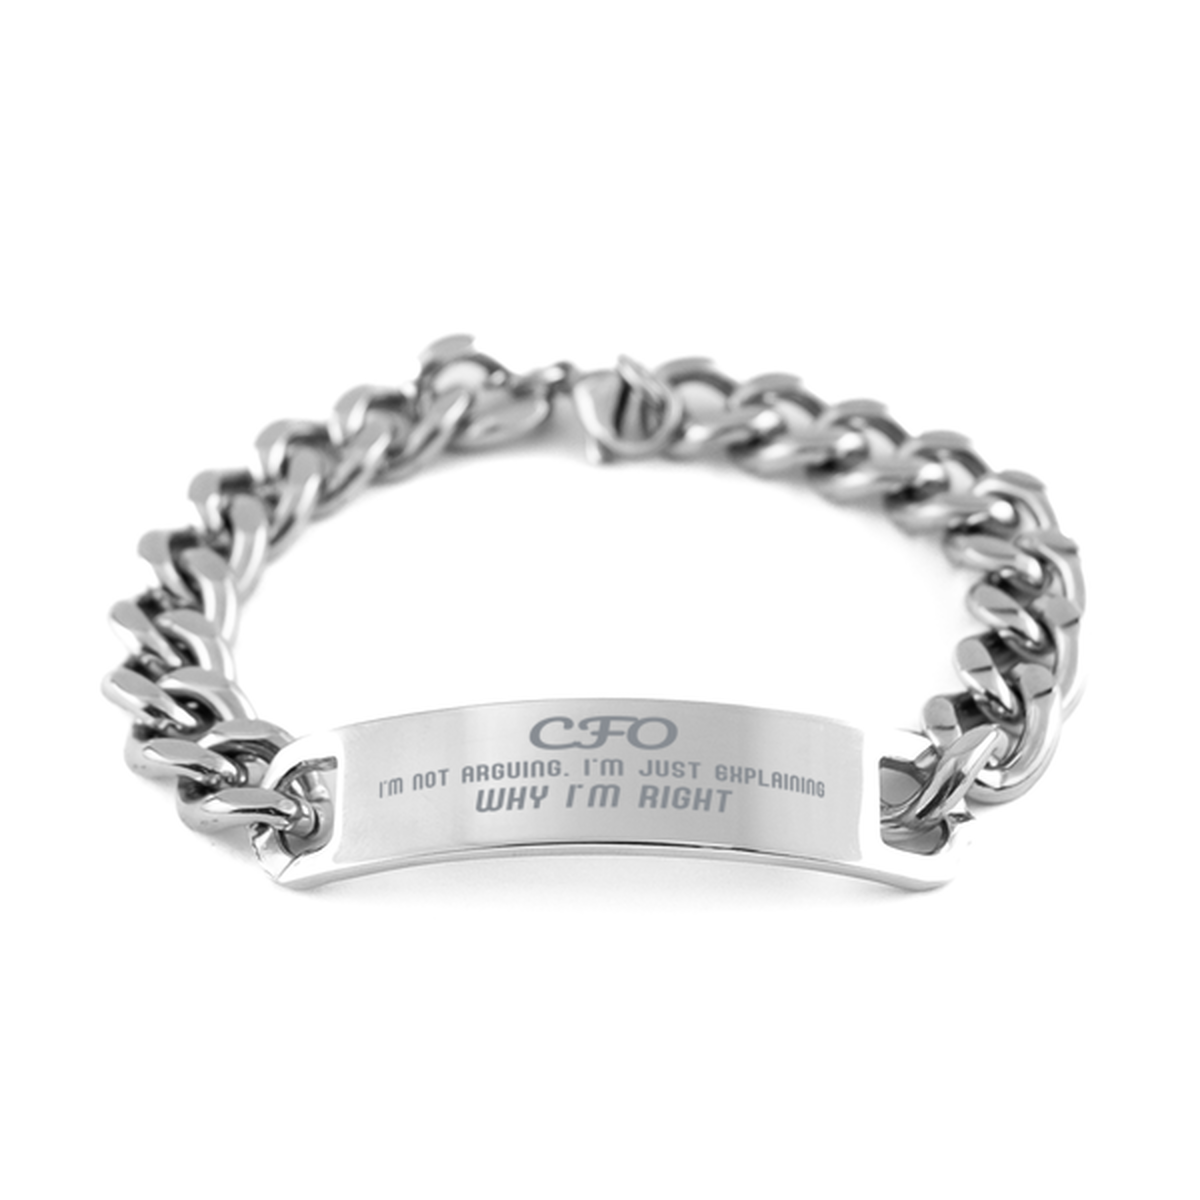 CFO I'm not Arguing. I'm Just Explaining Why I'm RIGHT Cuban Chain Stainless Steel Bracelet, Graduation Birthday Christmas CFO Gifts For CFO Funny Saying Quote Present for Men Women Coworker